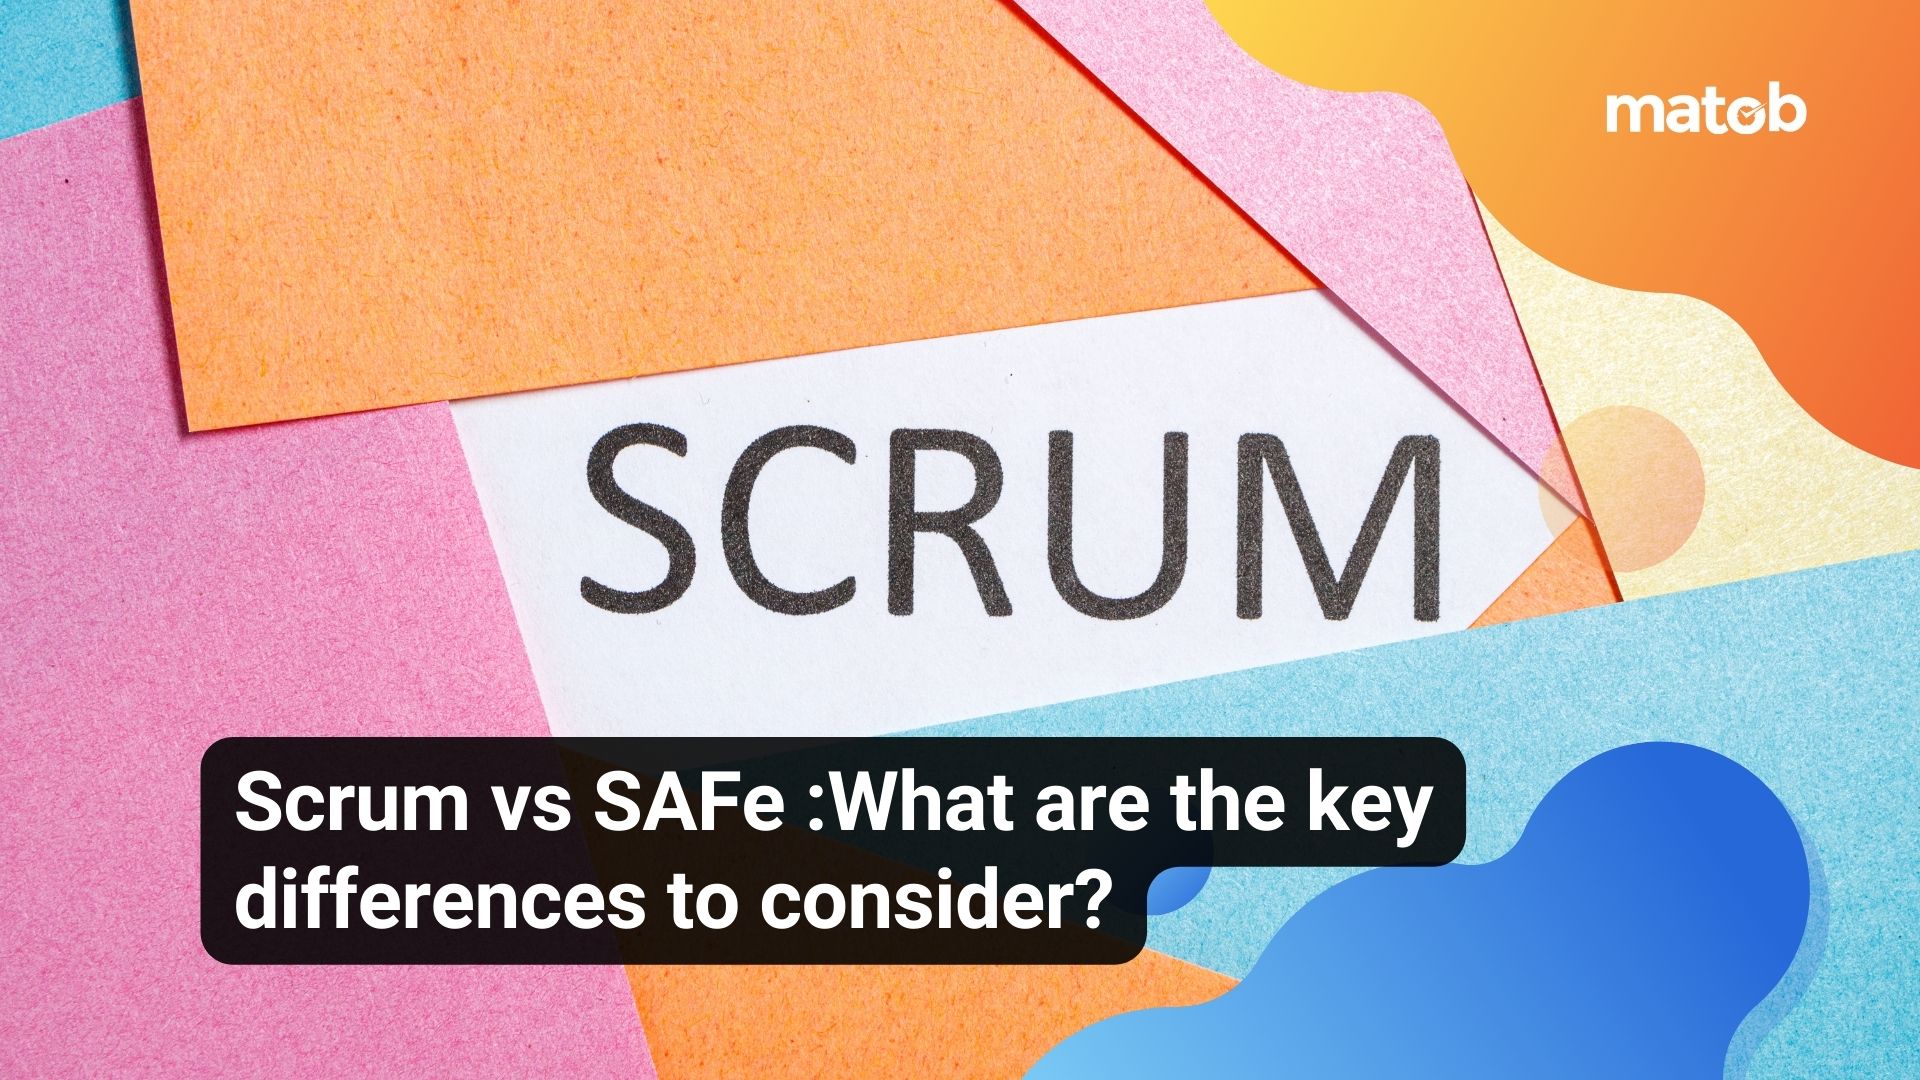 Scrum vs SAFe :What are the key differences to consider?